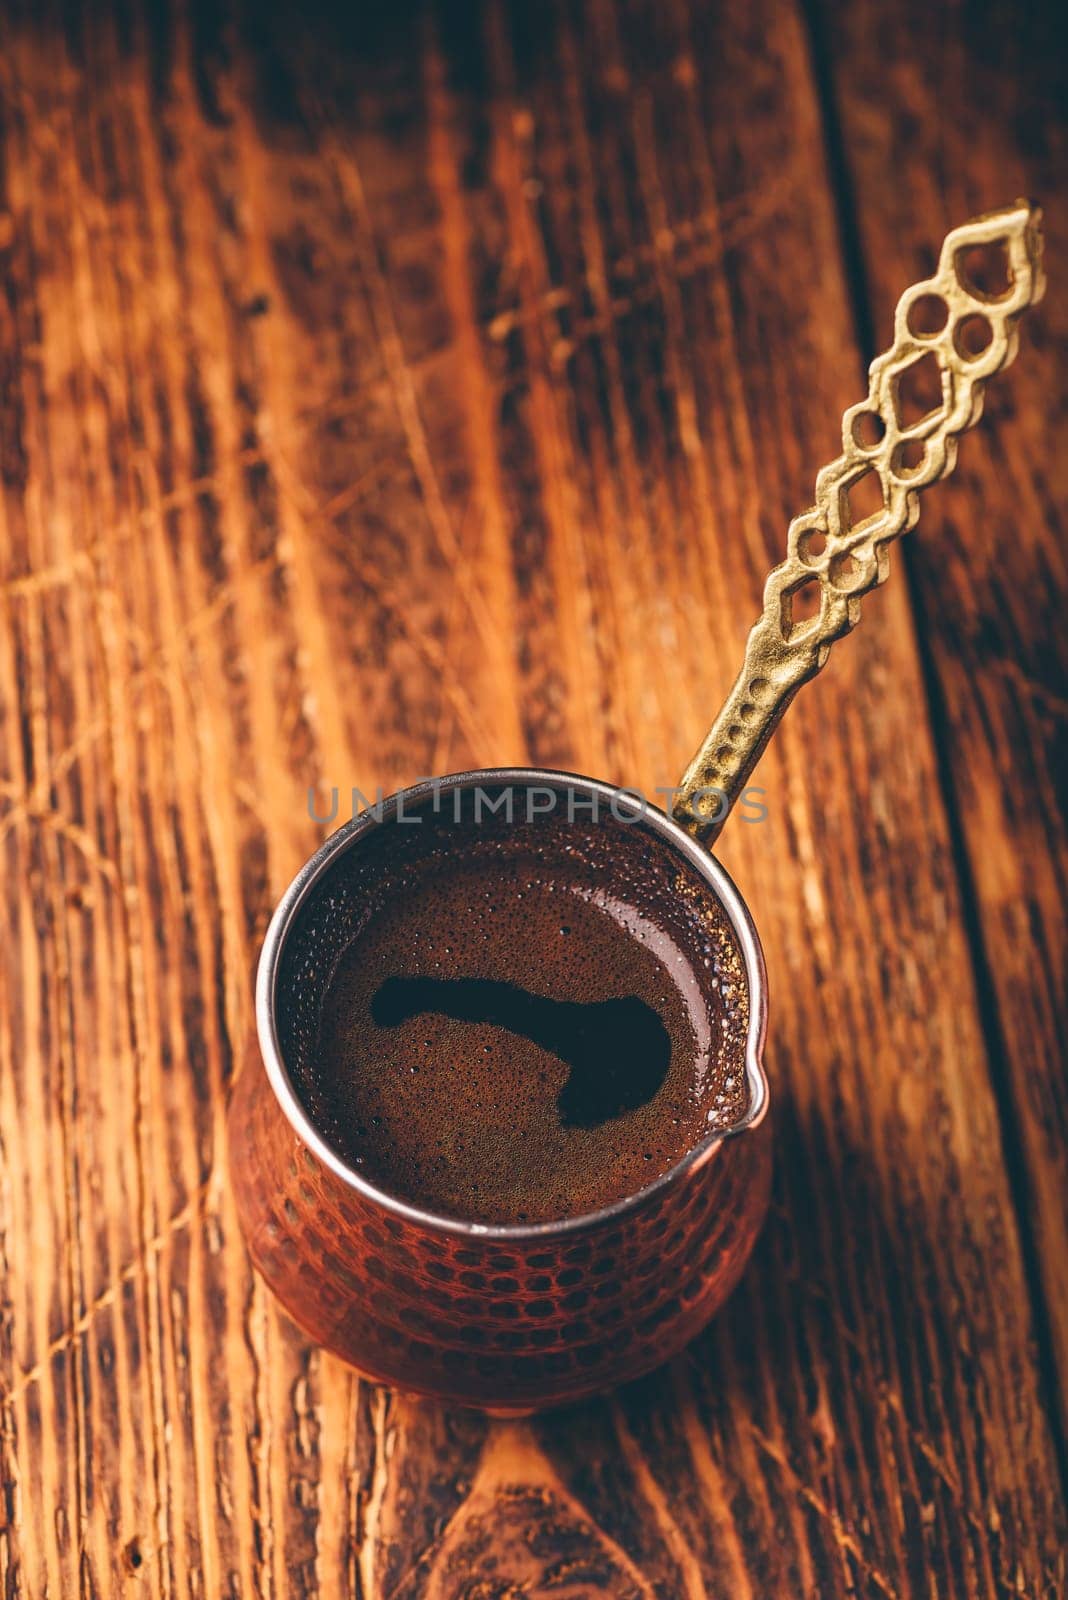 Turkish coffee. Brewed coffee in copper cezve on wooden surface